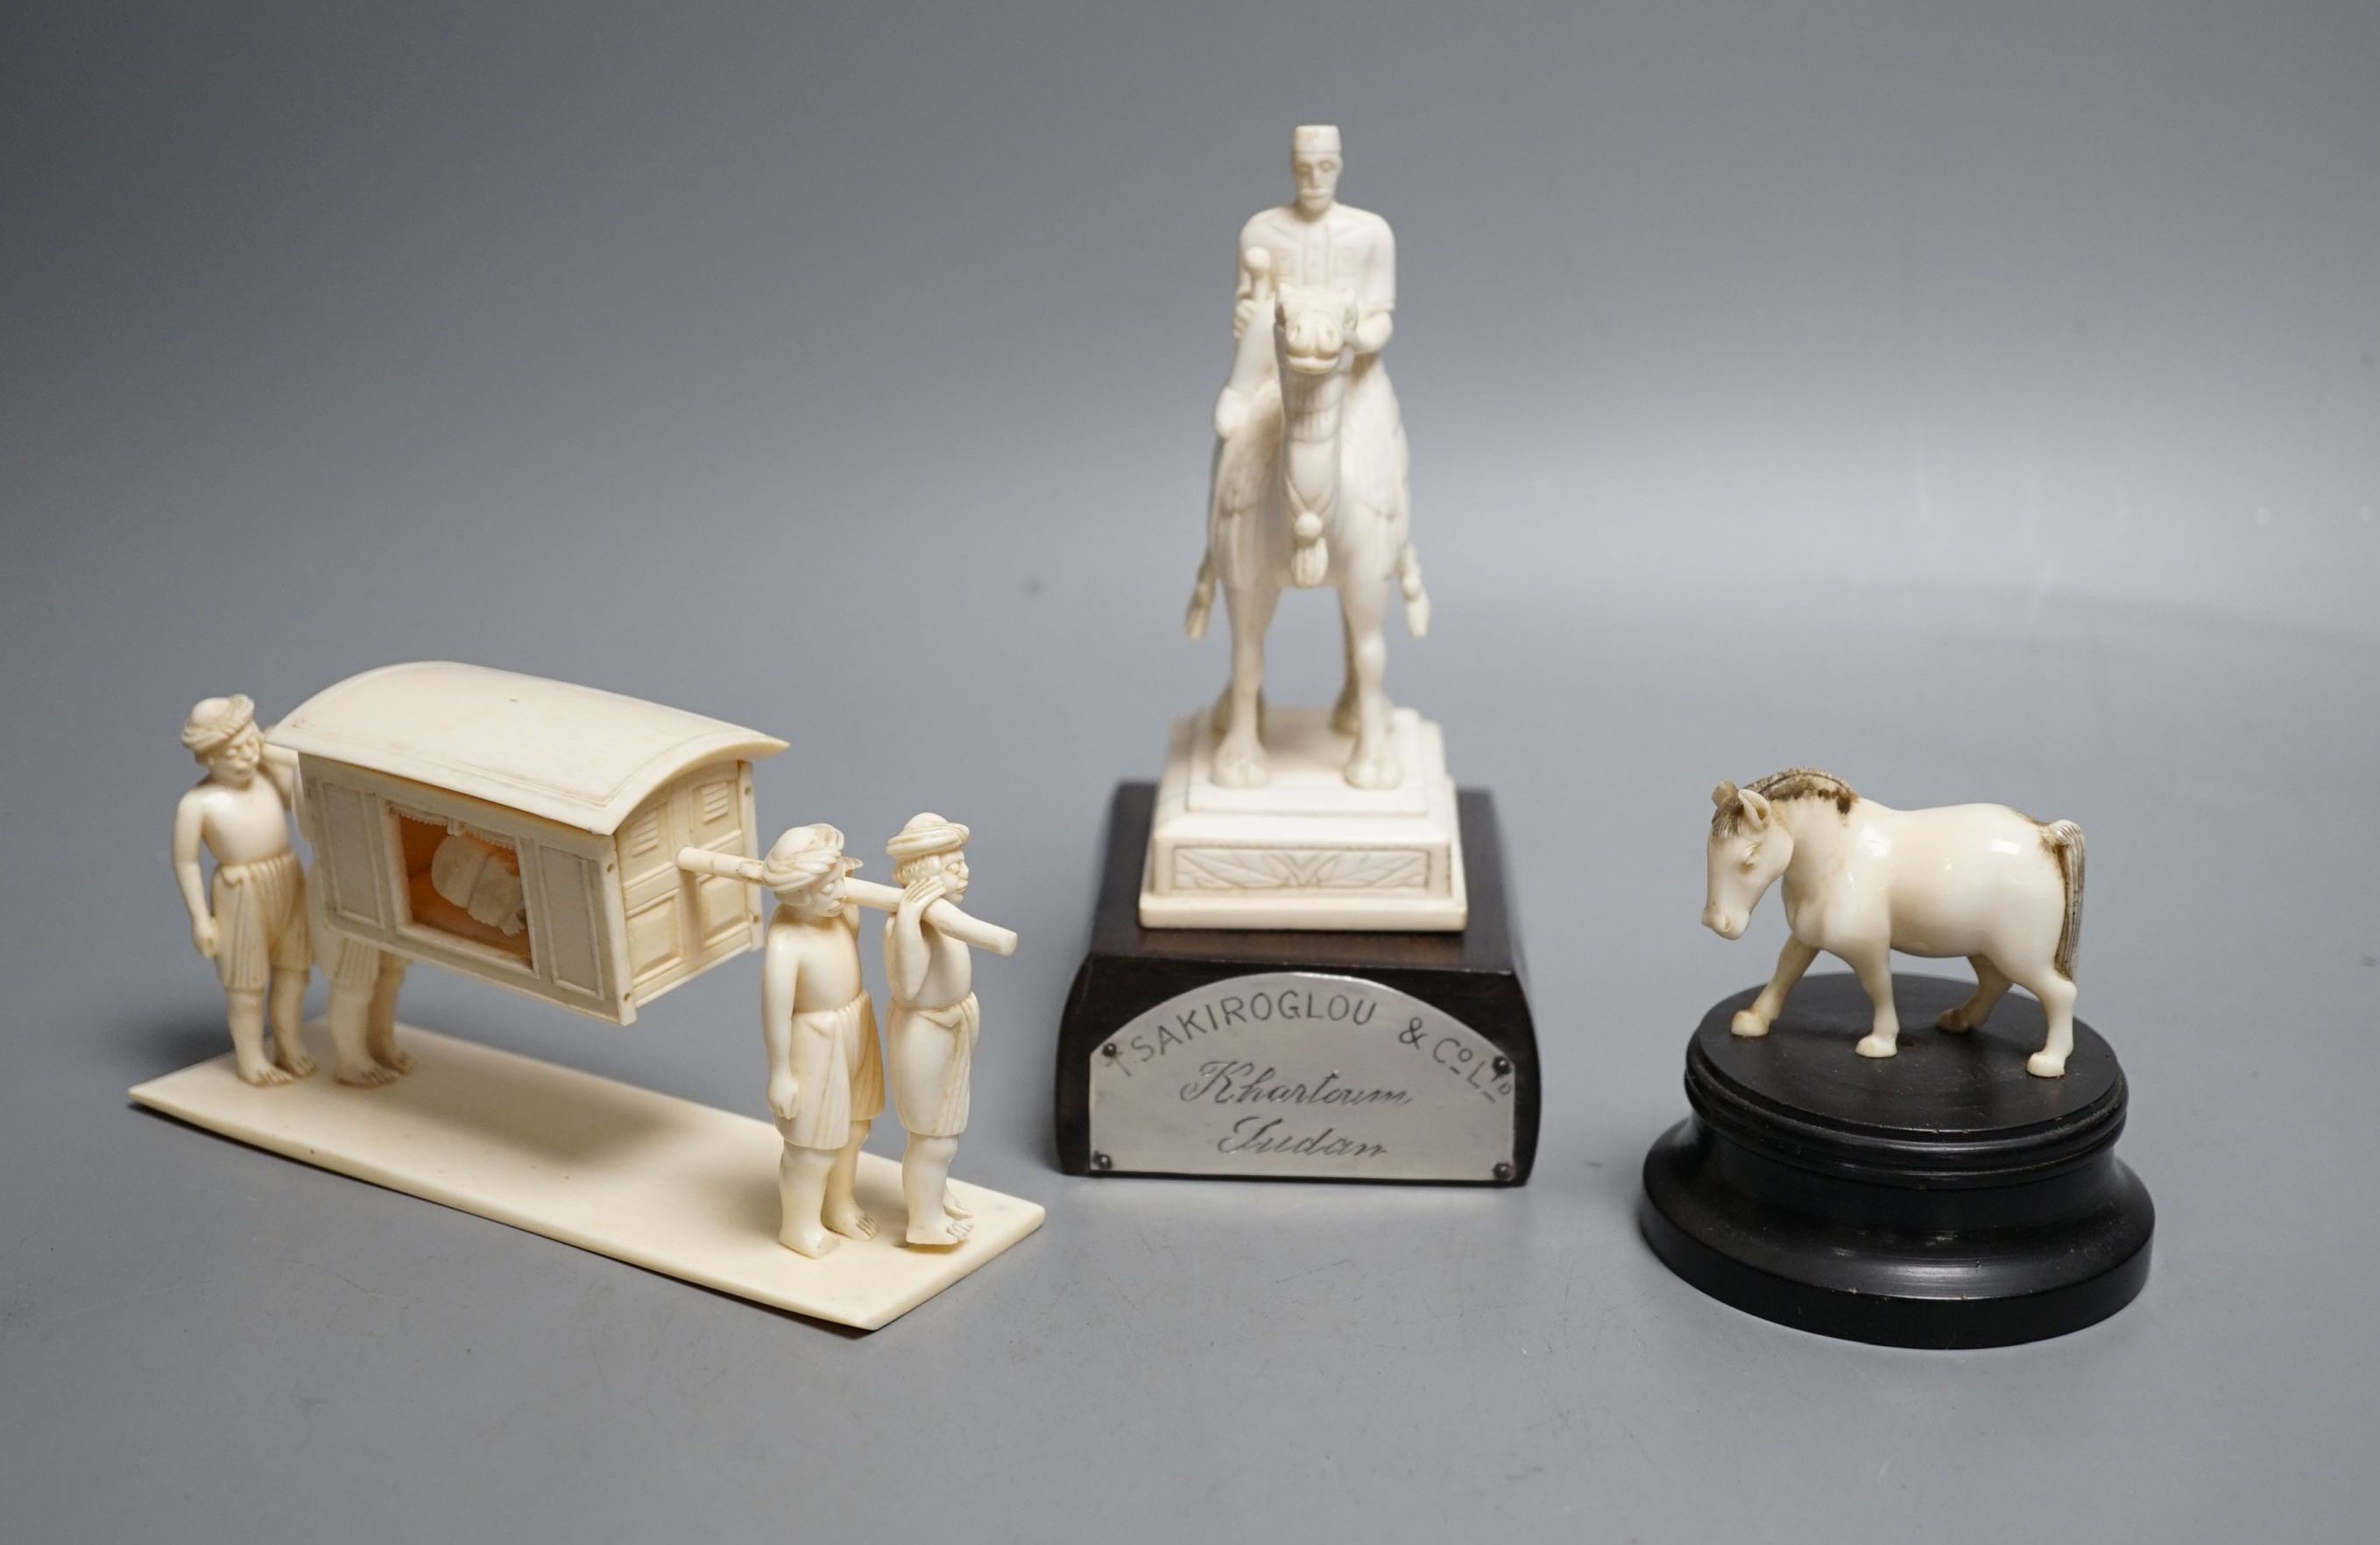 An Indian ivory sedan chair, an ivory horse and an ivory man on camel (General Gordon) with white metal plaque, 19th/early 20th century , Ivory carving of a man on a camel 14.5cms high.